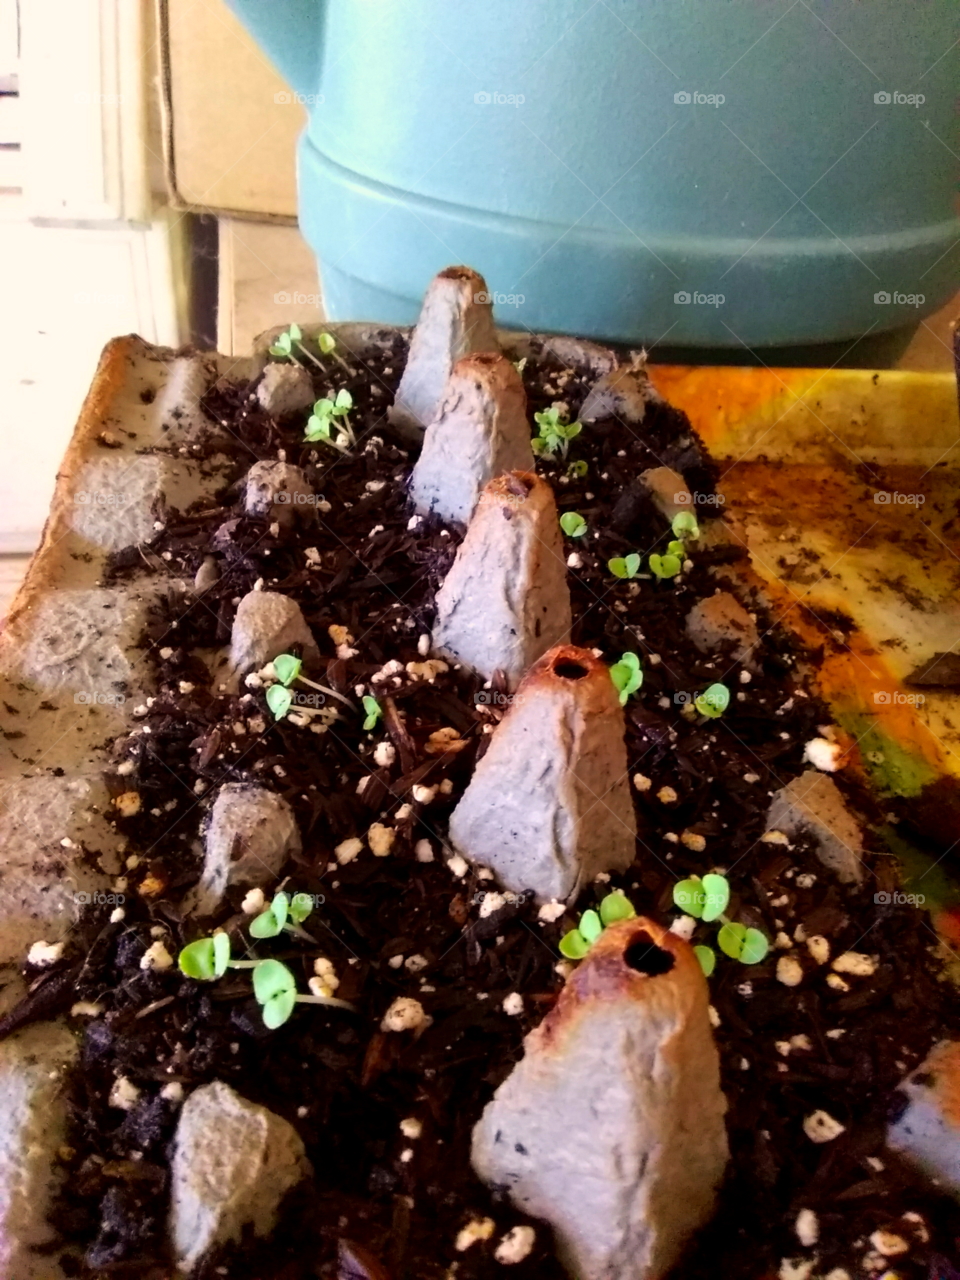 Sprouts in an egg carton